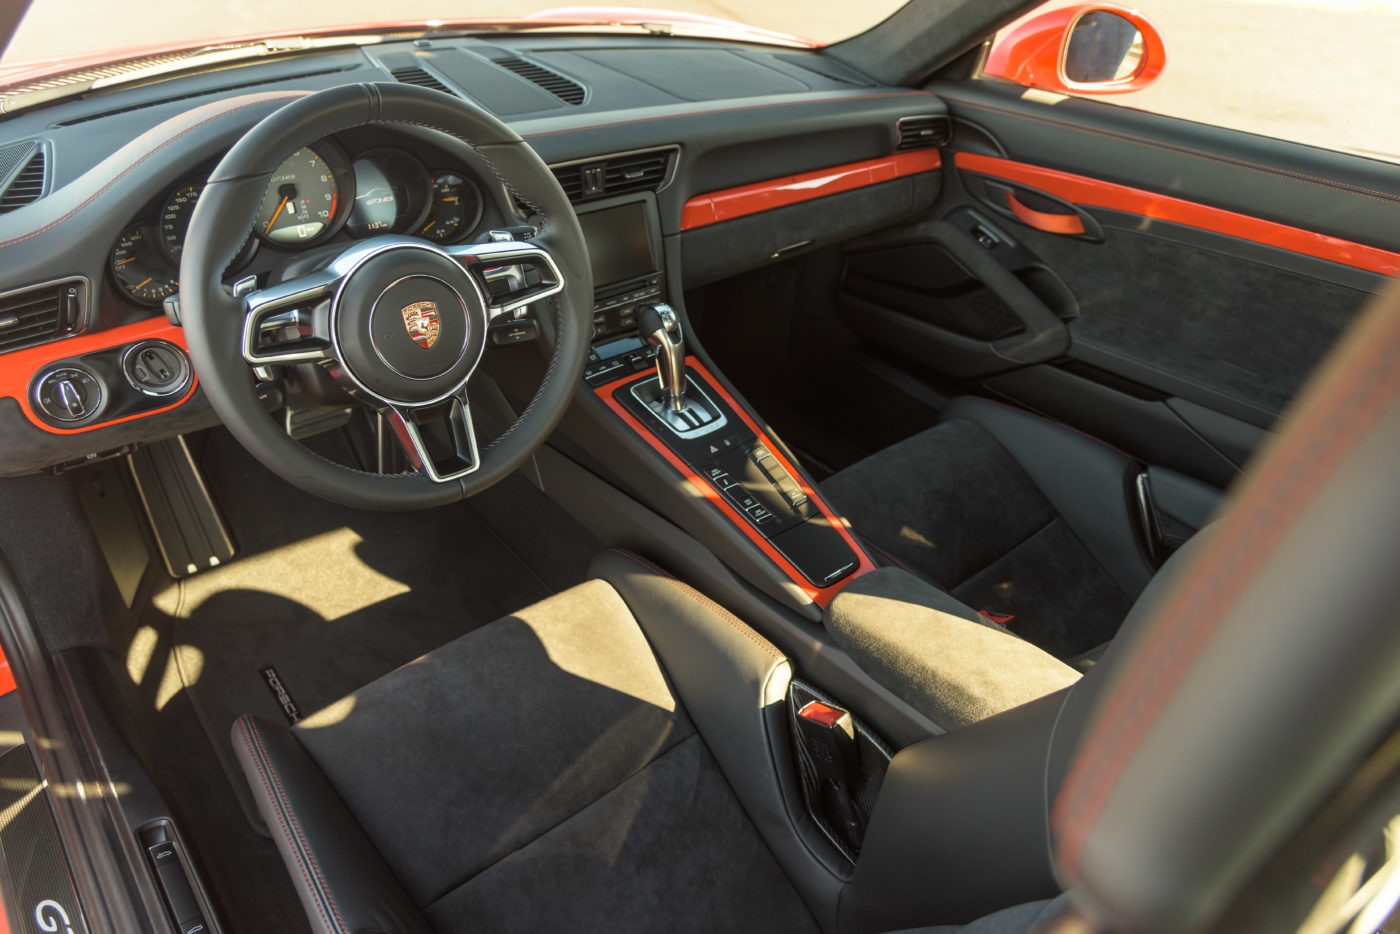 Porsche 911 GT3 RS specs include a 7-speed PDK transmission